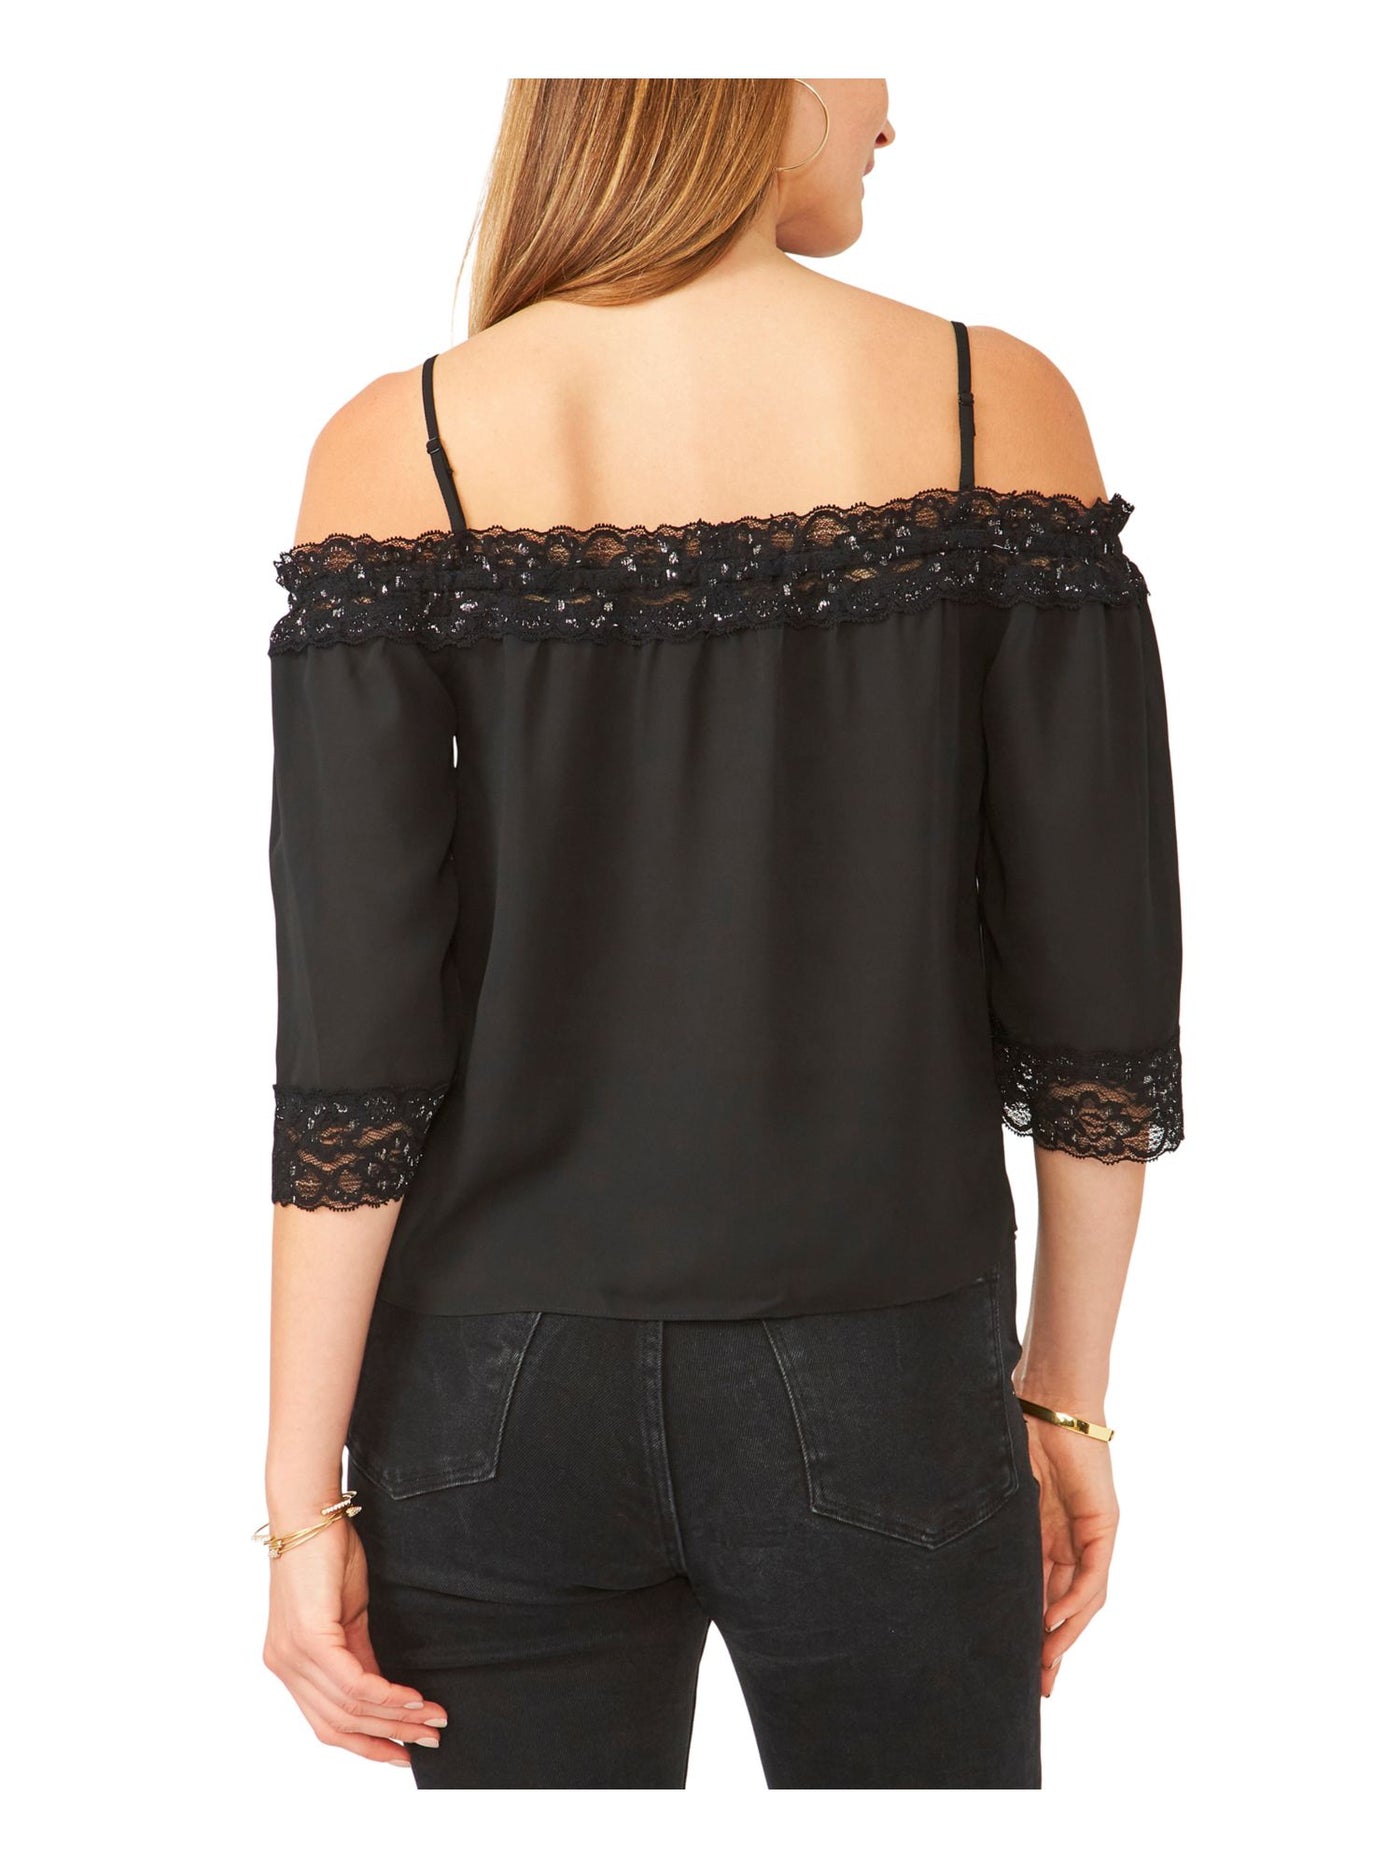 28TH & PARK Womens Ruffled Spaghetti Strap Off Shoulder Party Top Juniors